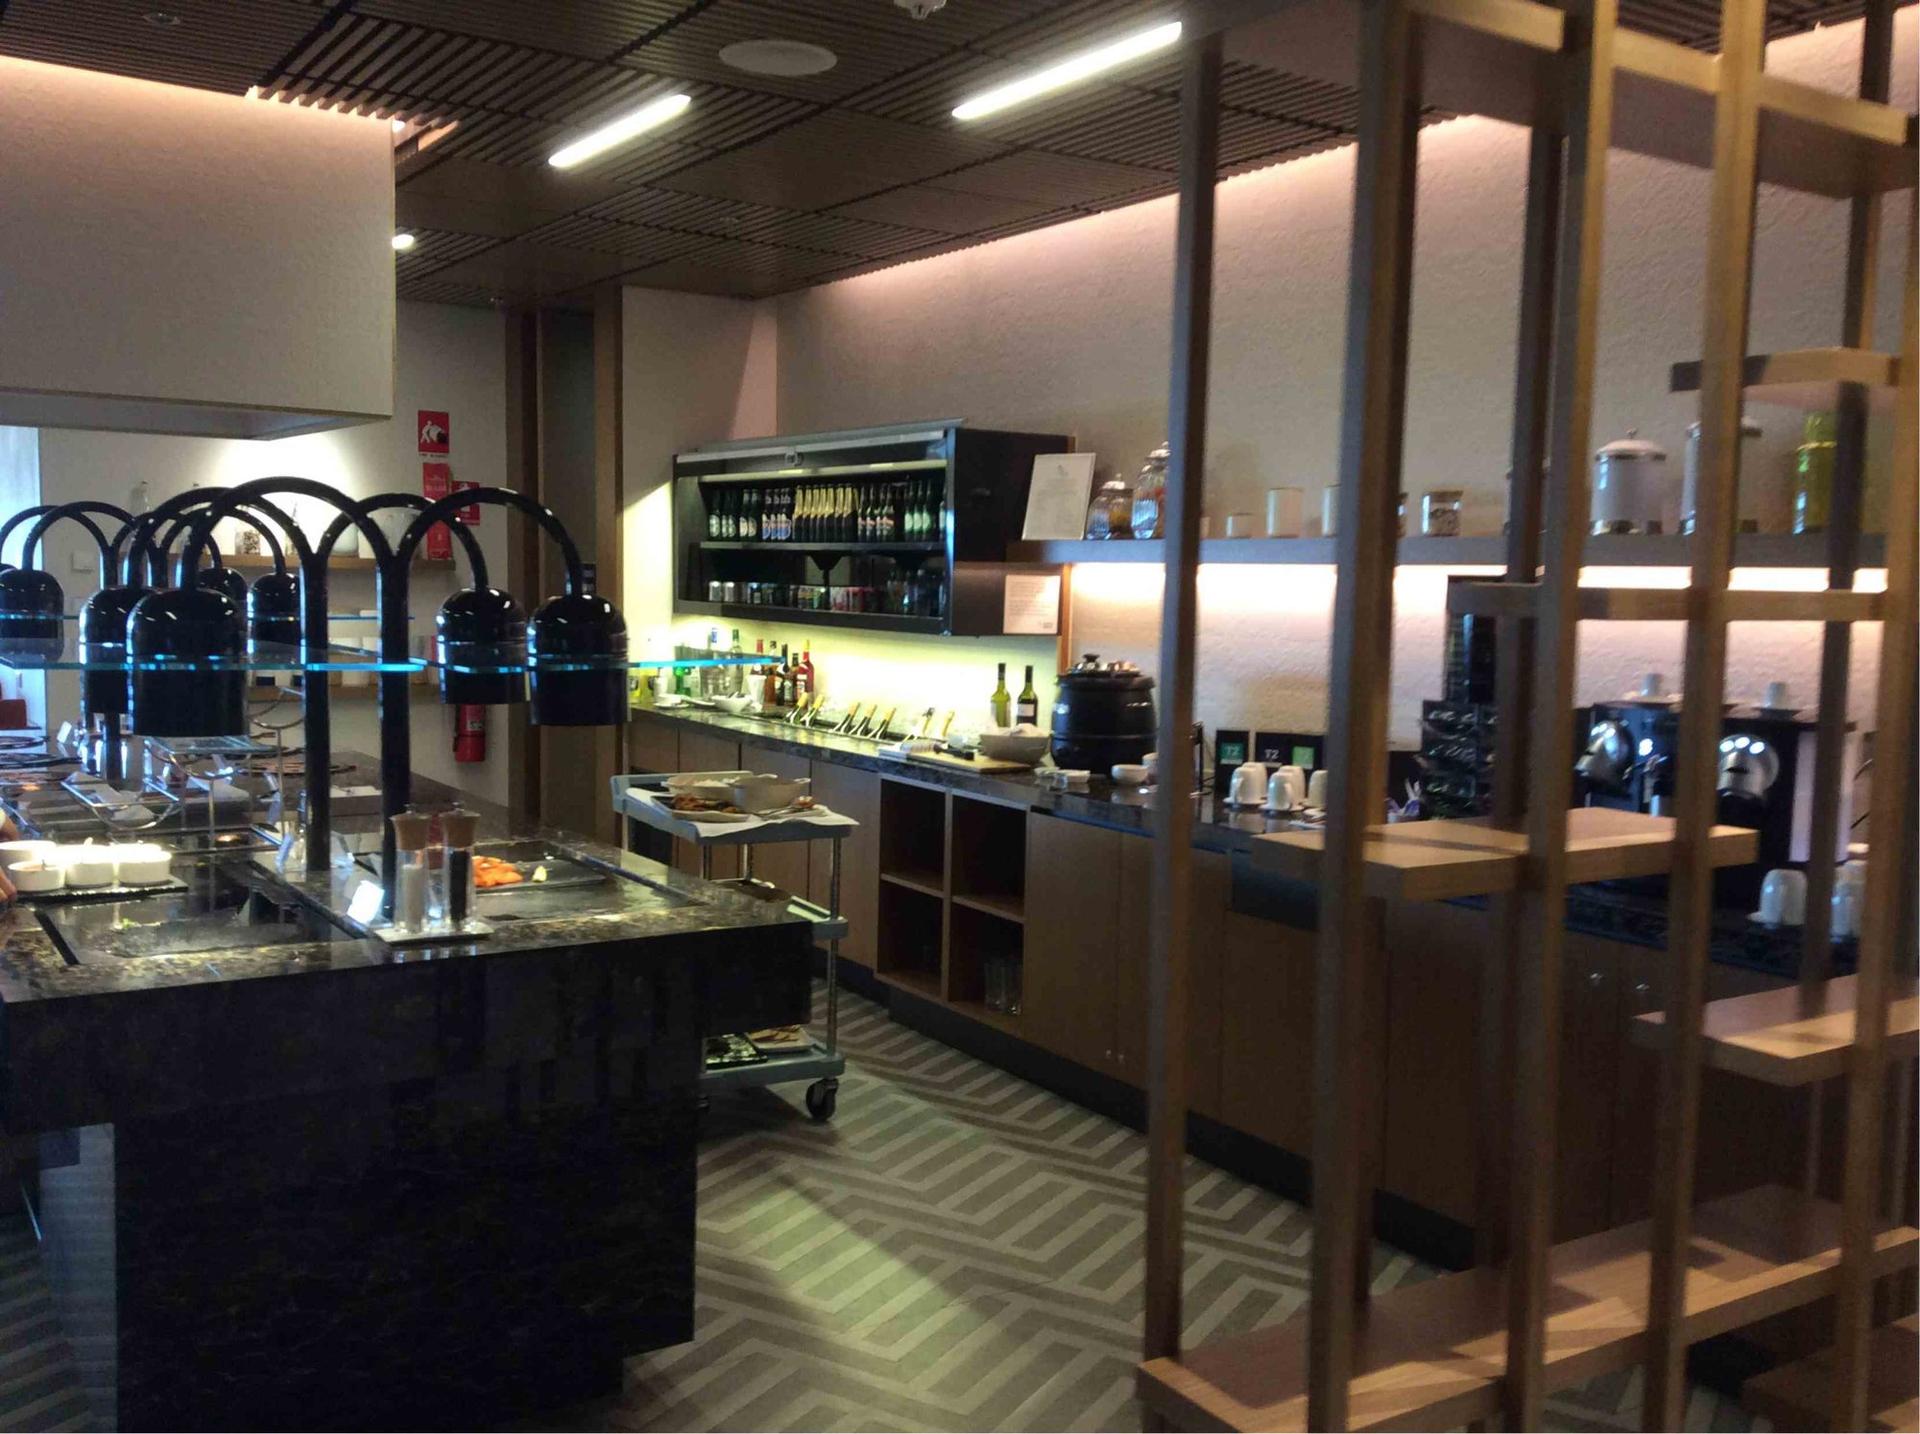 Singapore Airlines SilverKris Business Class Lounge image 11 of 20